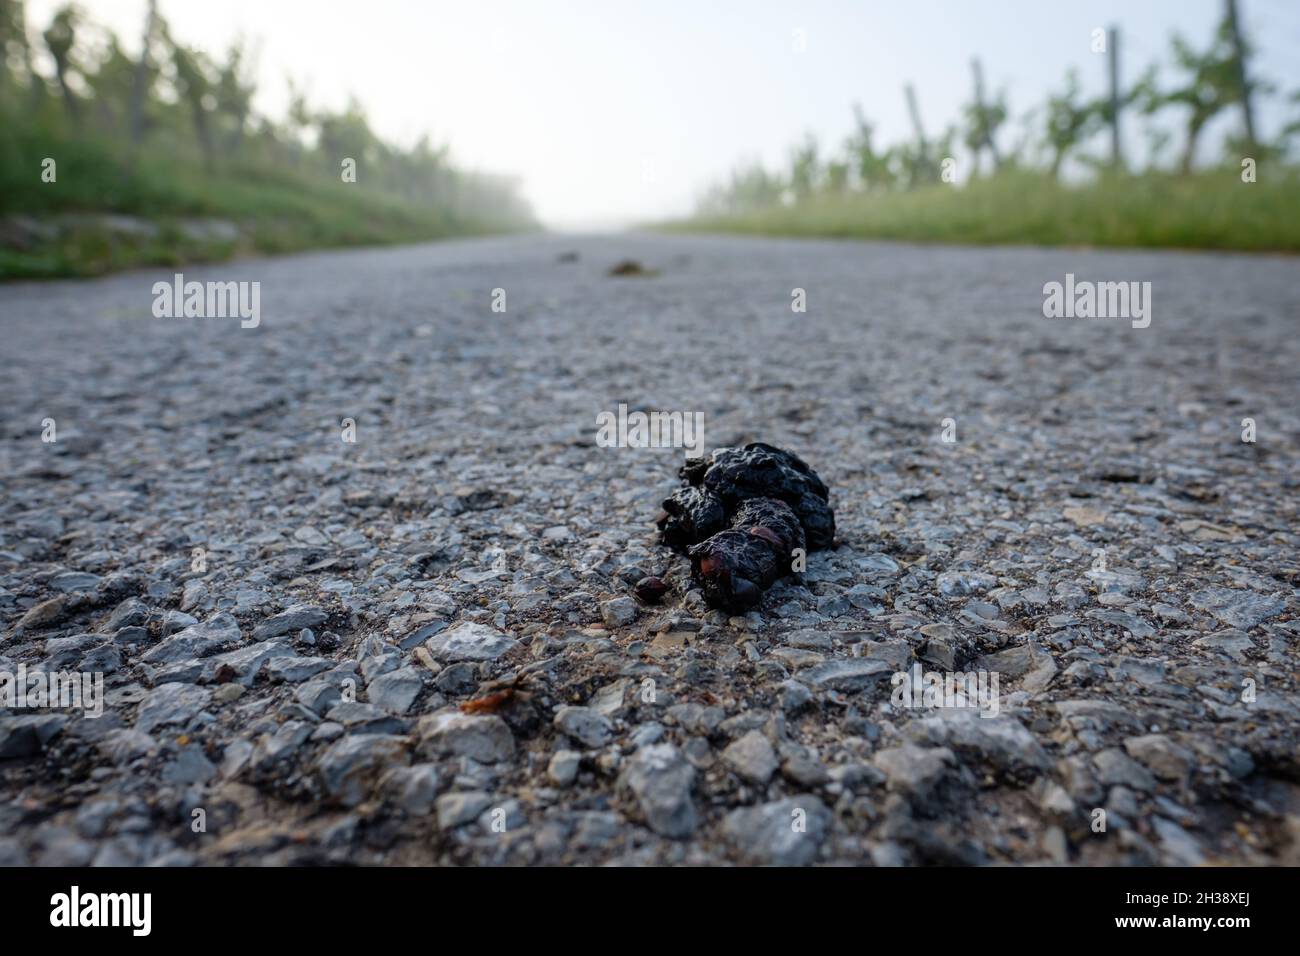 Closeup shot of deer poo dung on the road Stock Photo